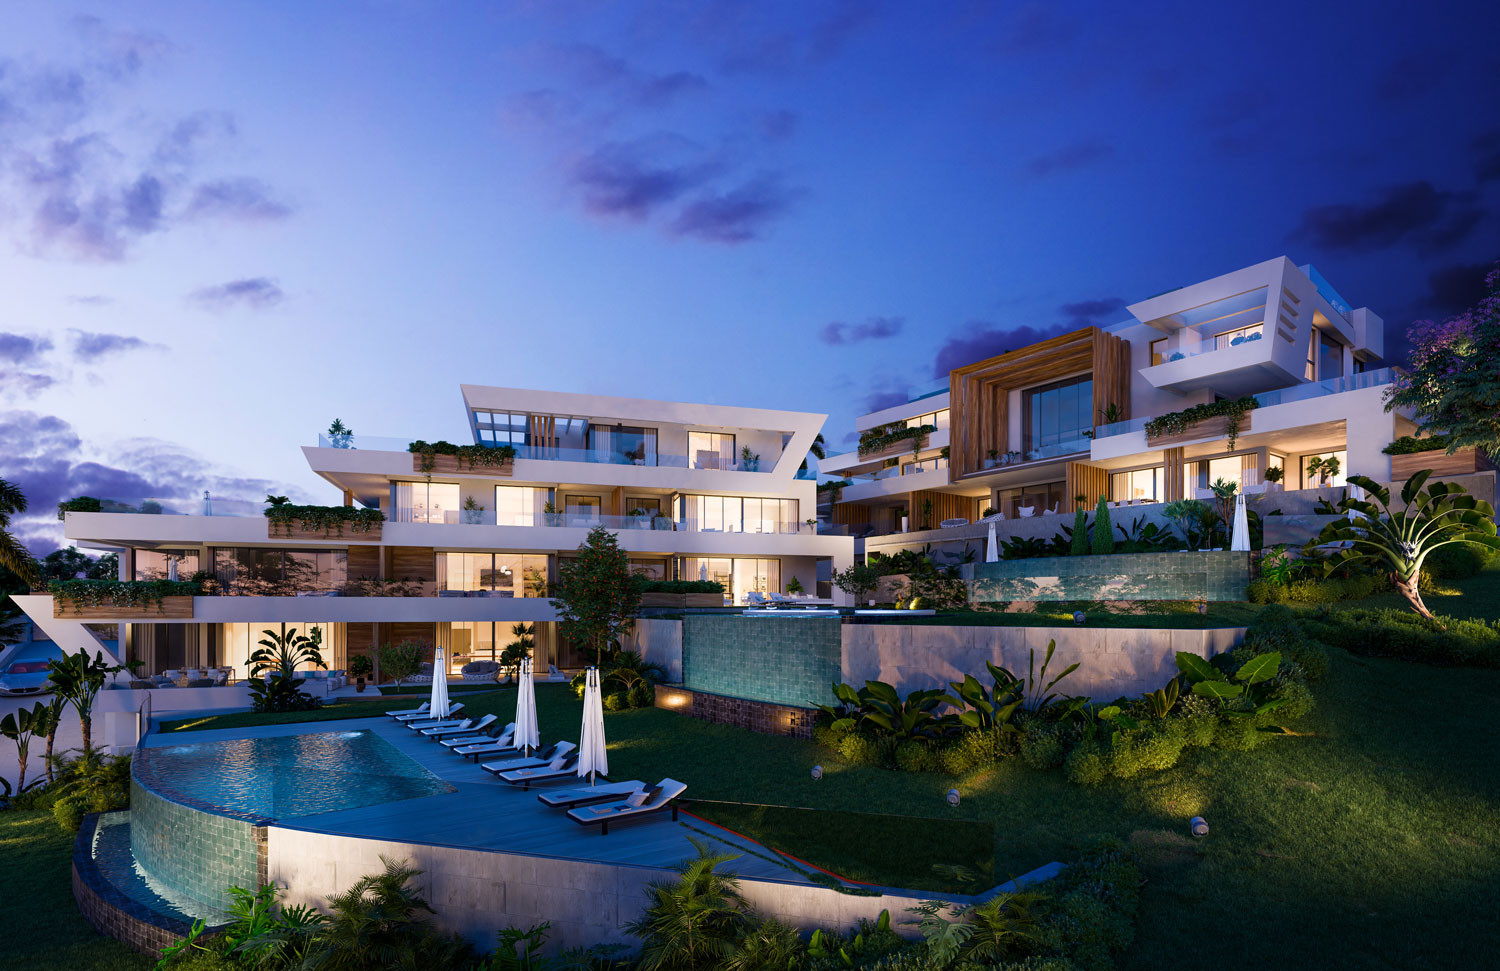 Boutique front line golf development of luxury contemporary apartments and penthouses in Cabopino